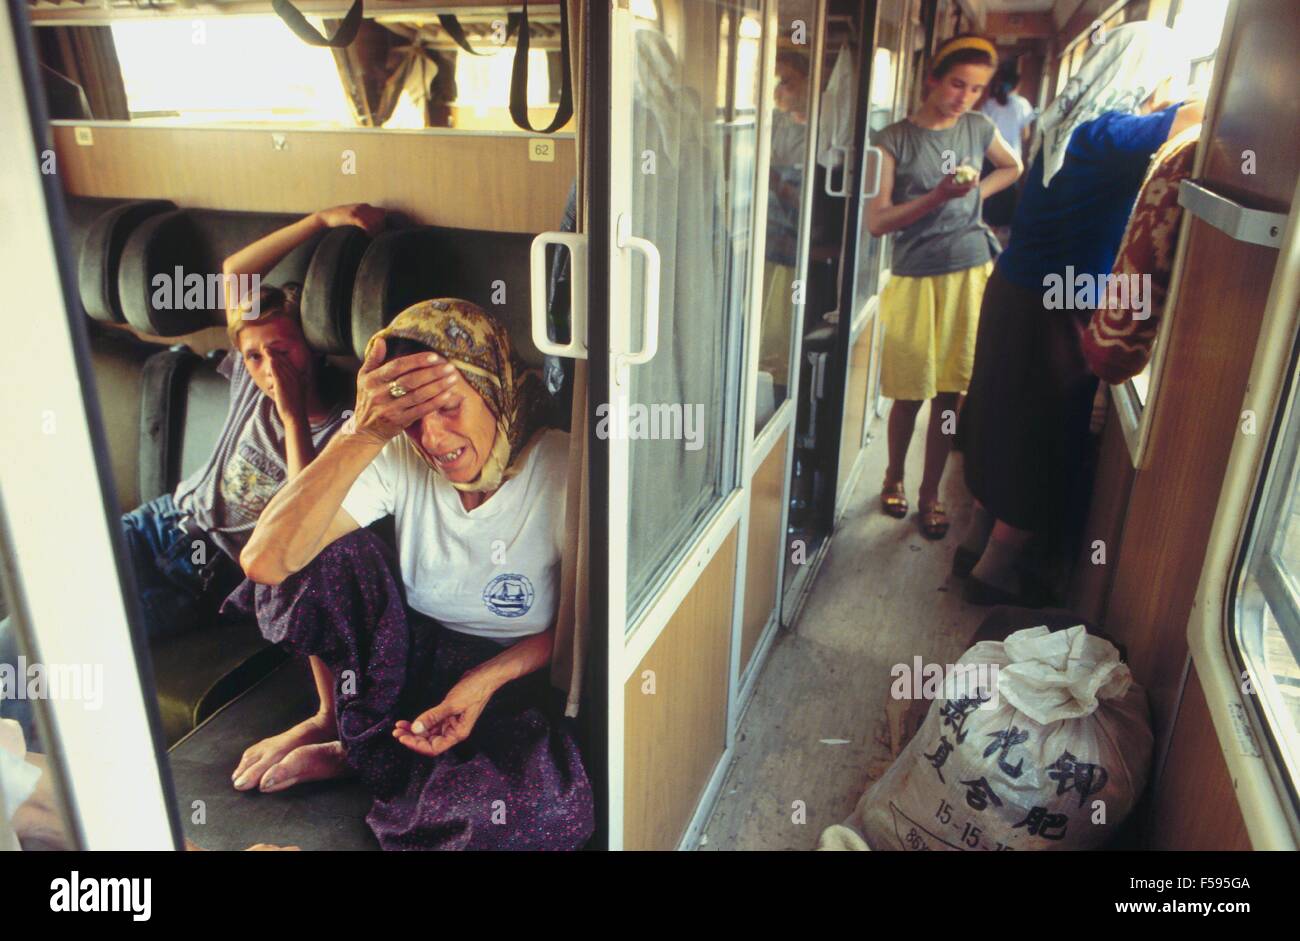 War in the ex Yugoslavia, train of Bosnian refugees escaping from ethnic cleansing of Serbs blocked in Croatia (July 1992) Stock Photo